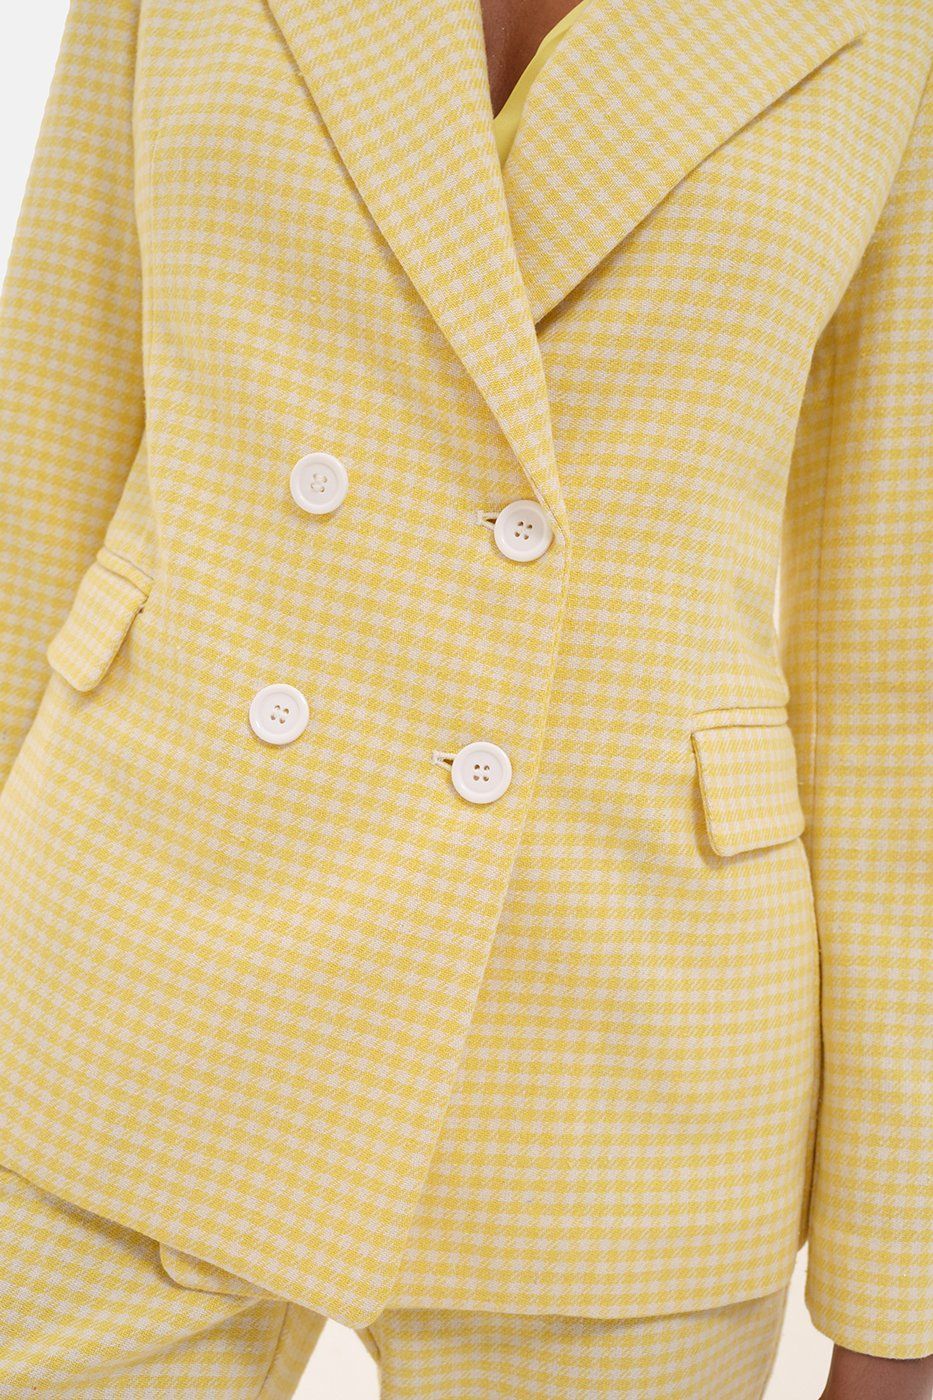 Face to Face Style yellow Susanna jacket